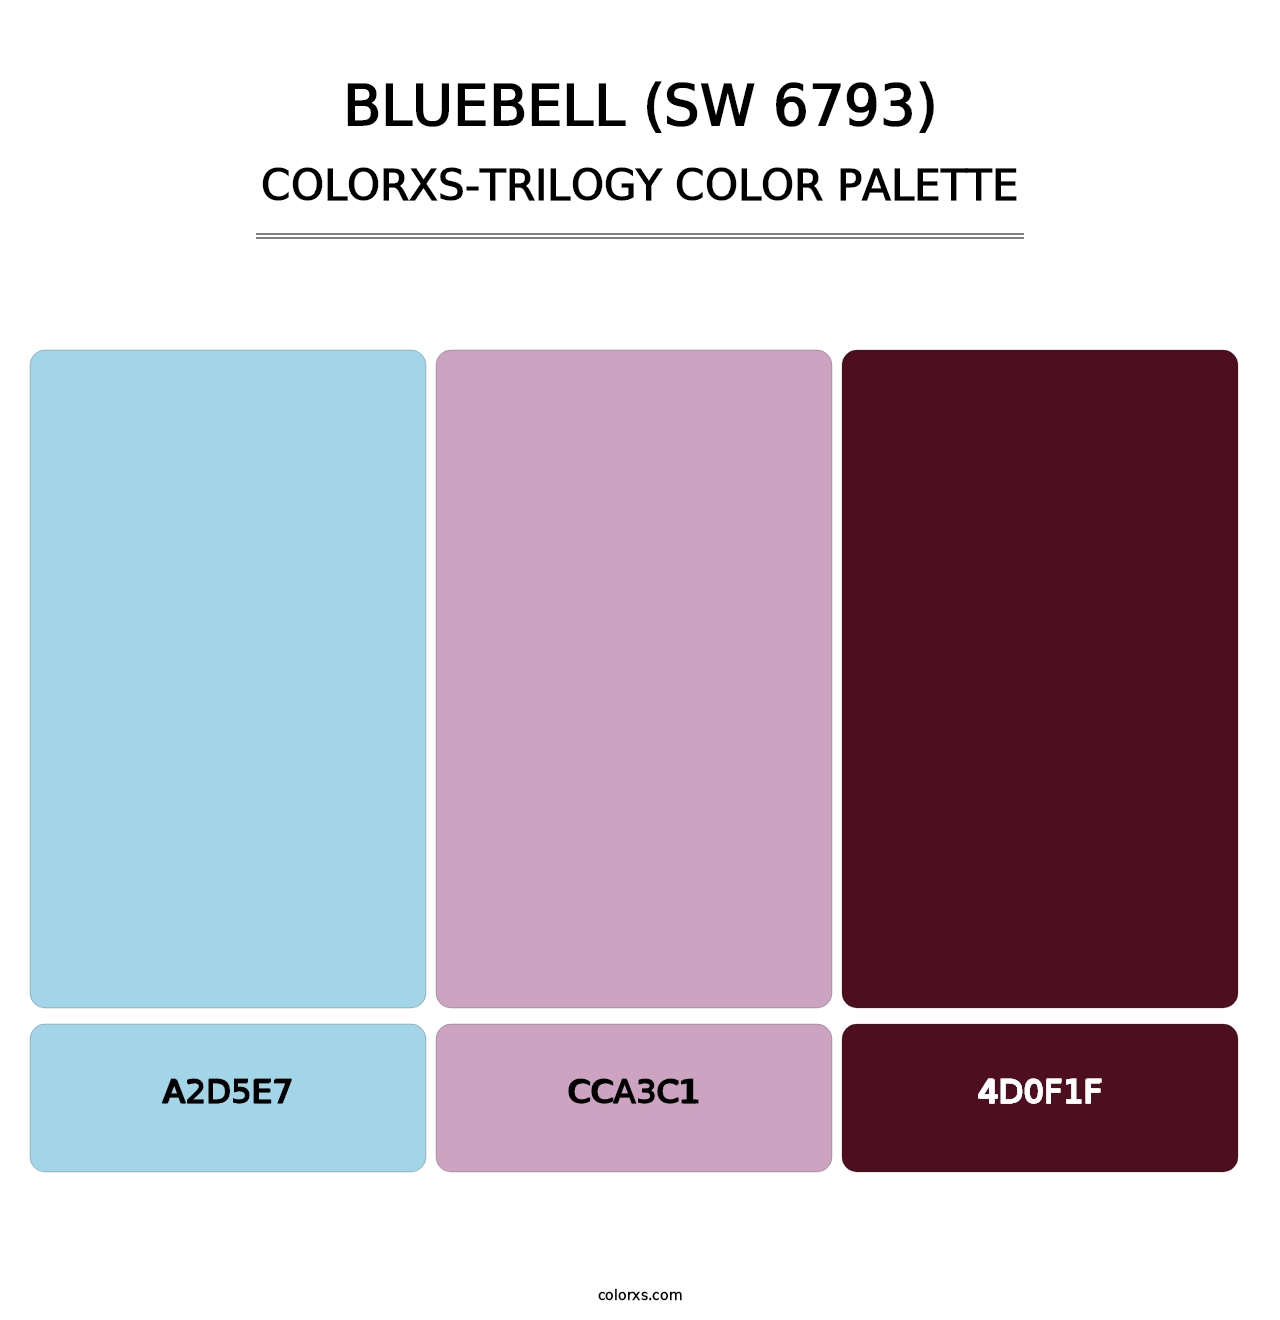 Bluebell (SW 6793) - Colorxs Trilogy Palette